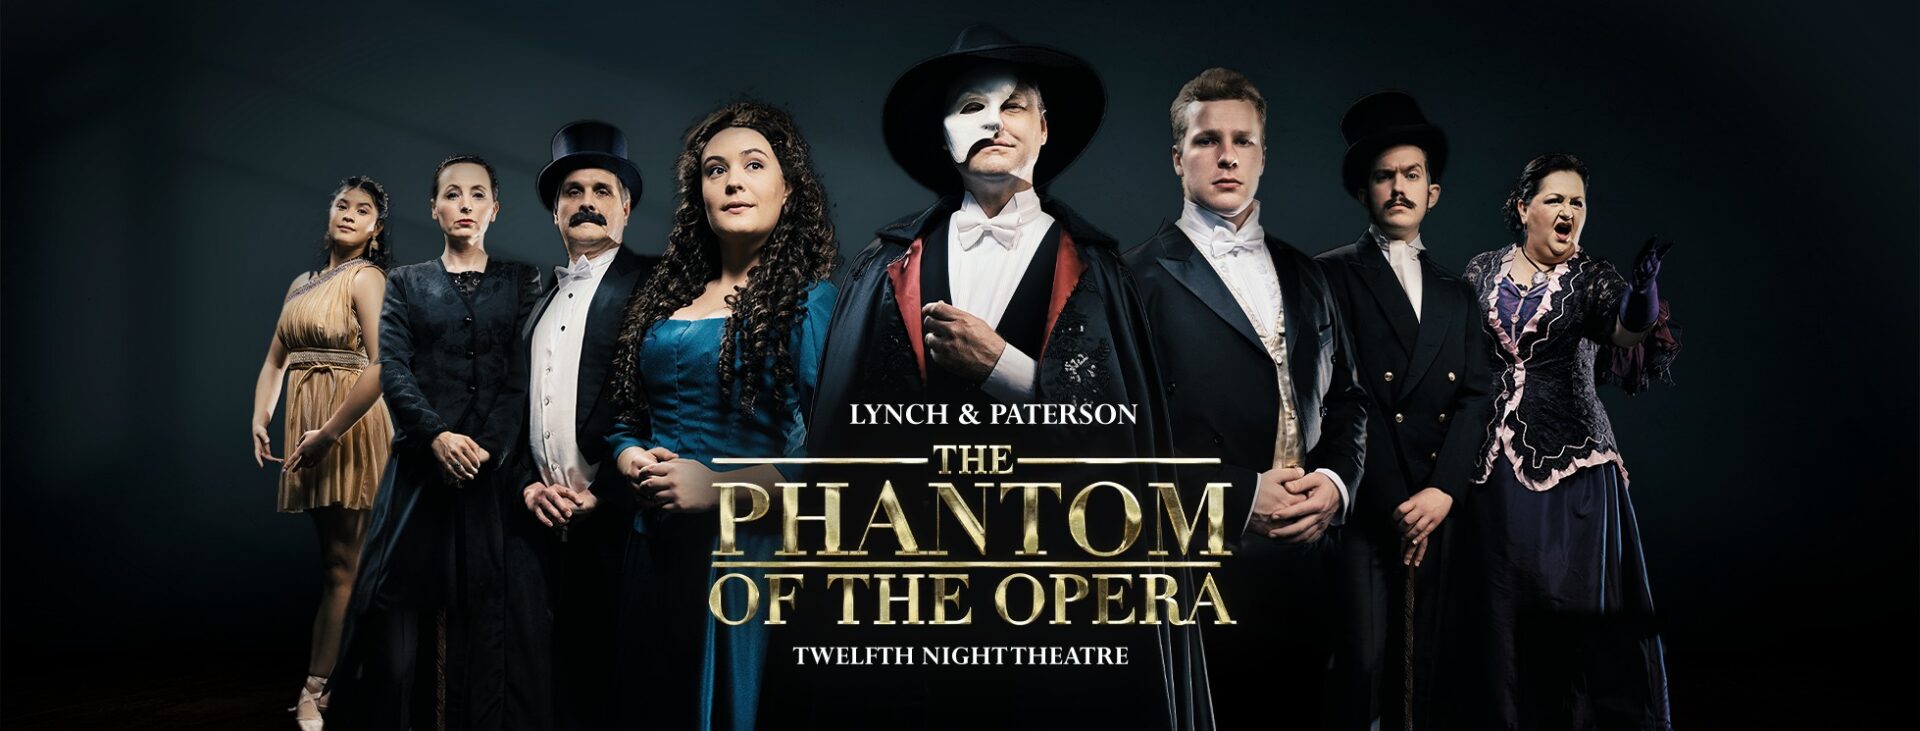 Phantom of the Opera - Lynch and Paterson 2